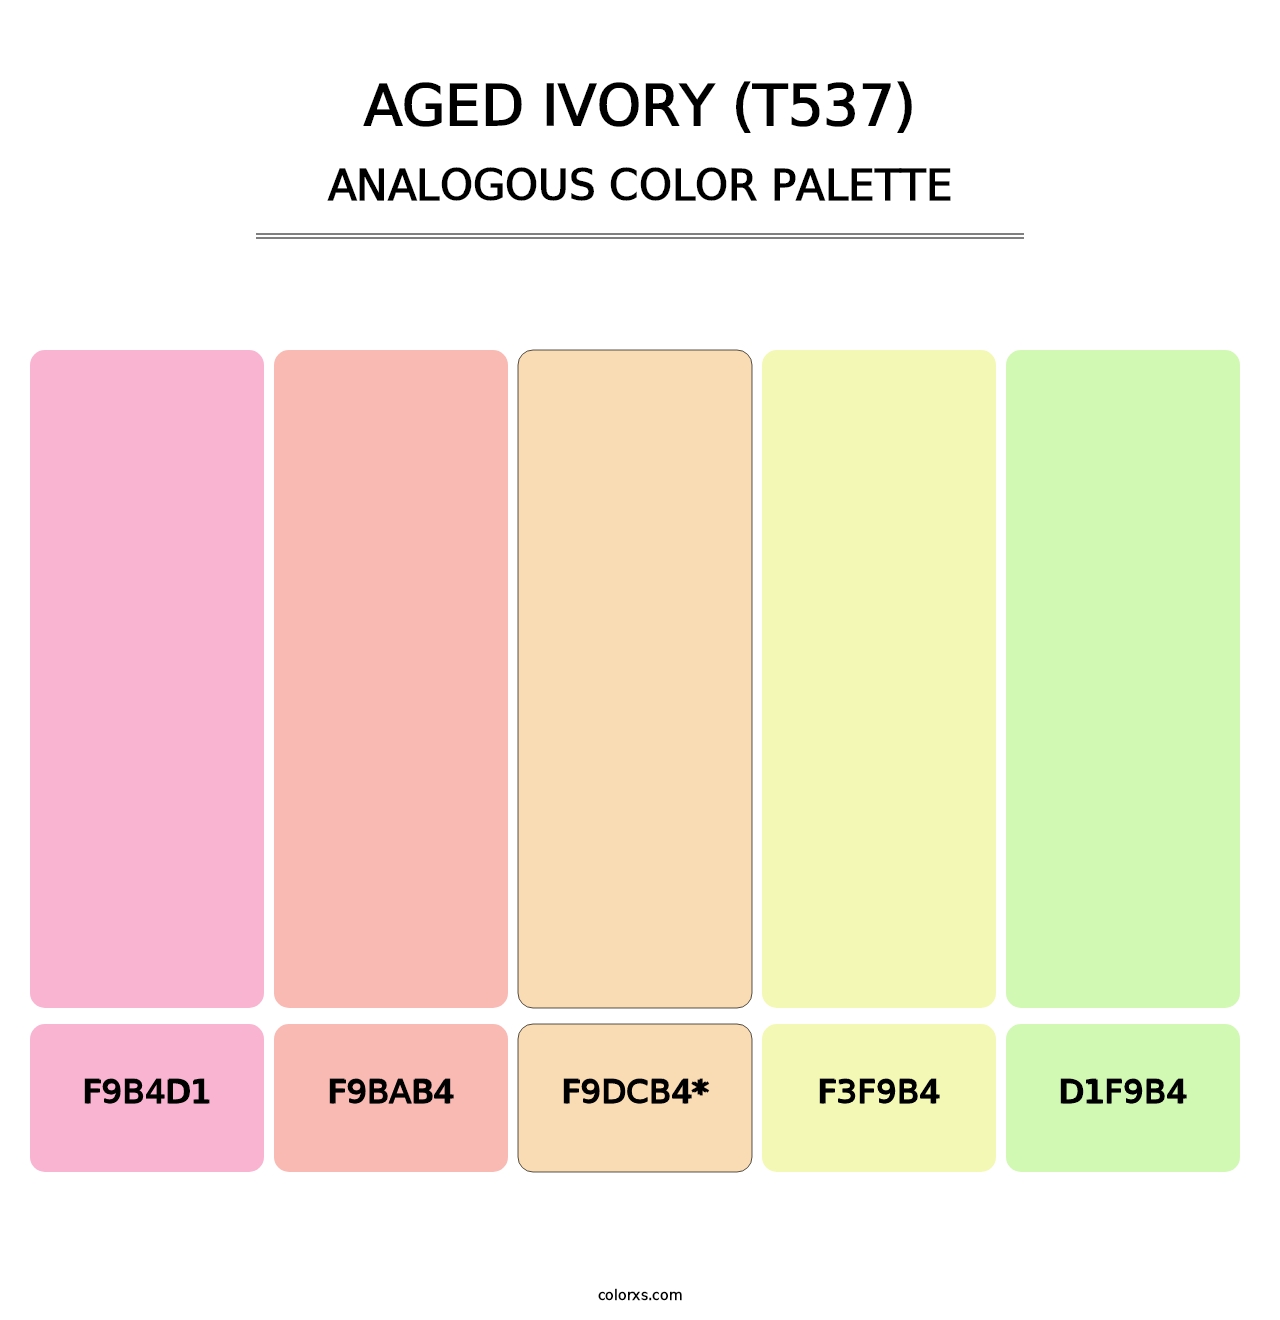 Aged Ivory (T537) - Analogous Color Palette